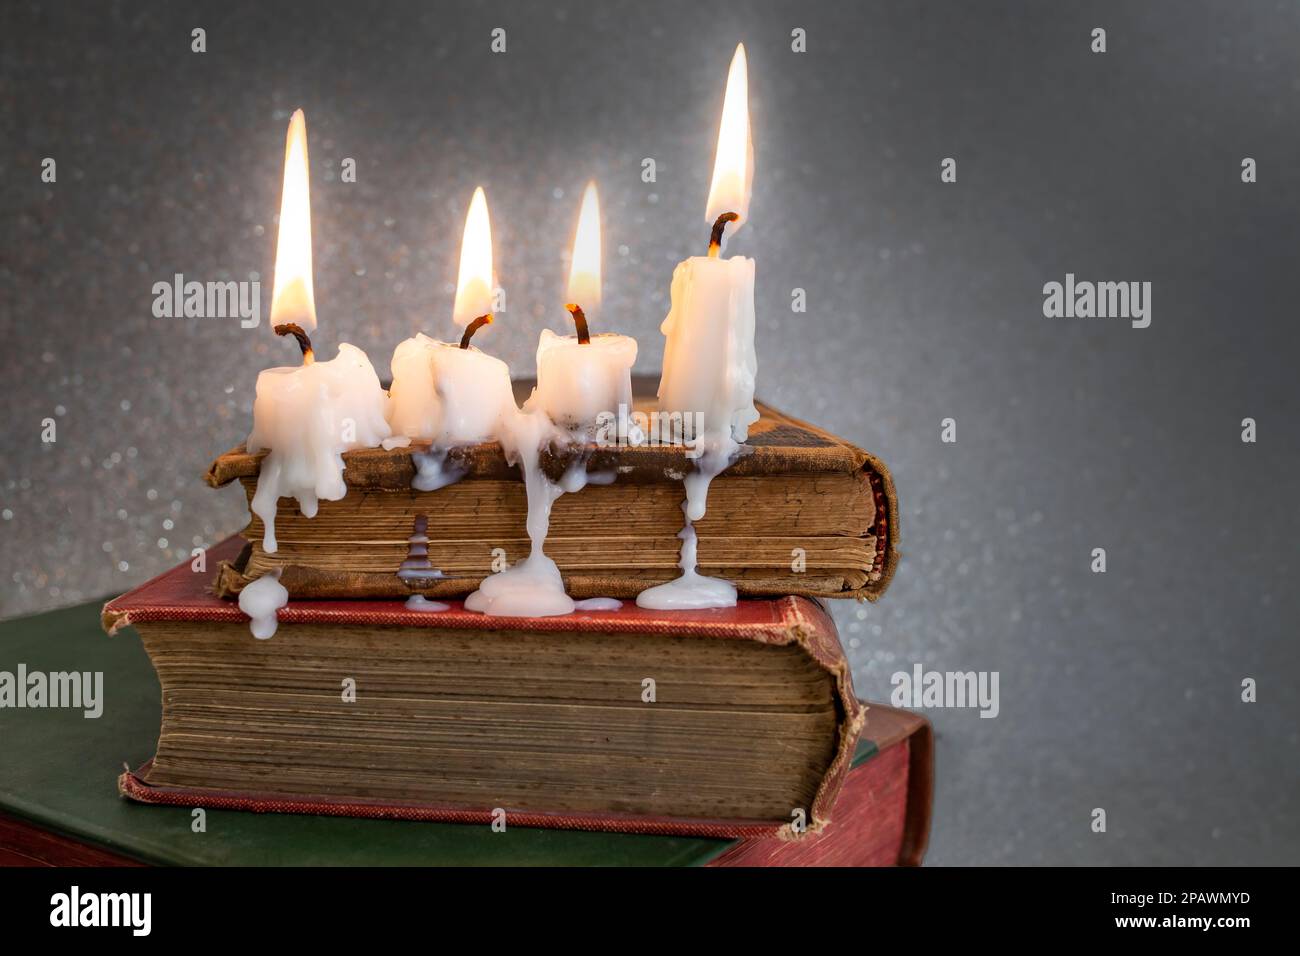 4 burning candles with dripping wax on vintage hard cover books, soft focus close up Stock Photo